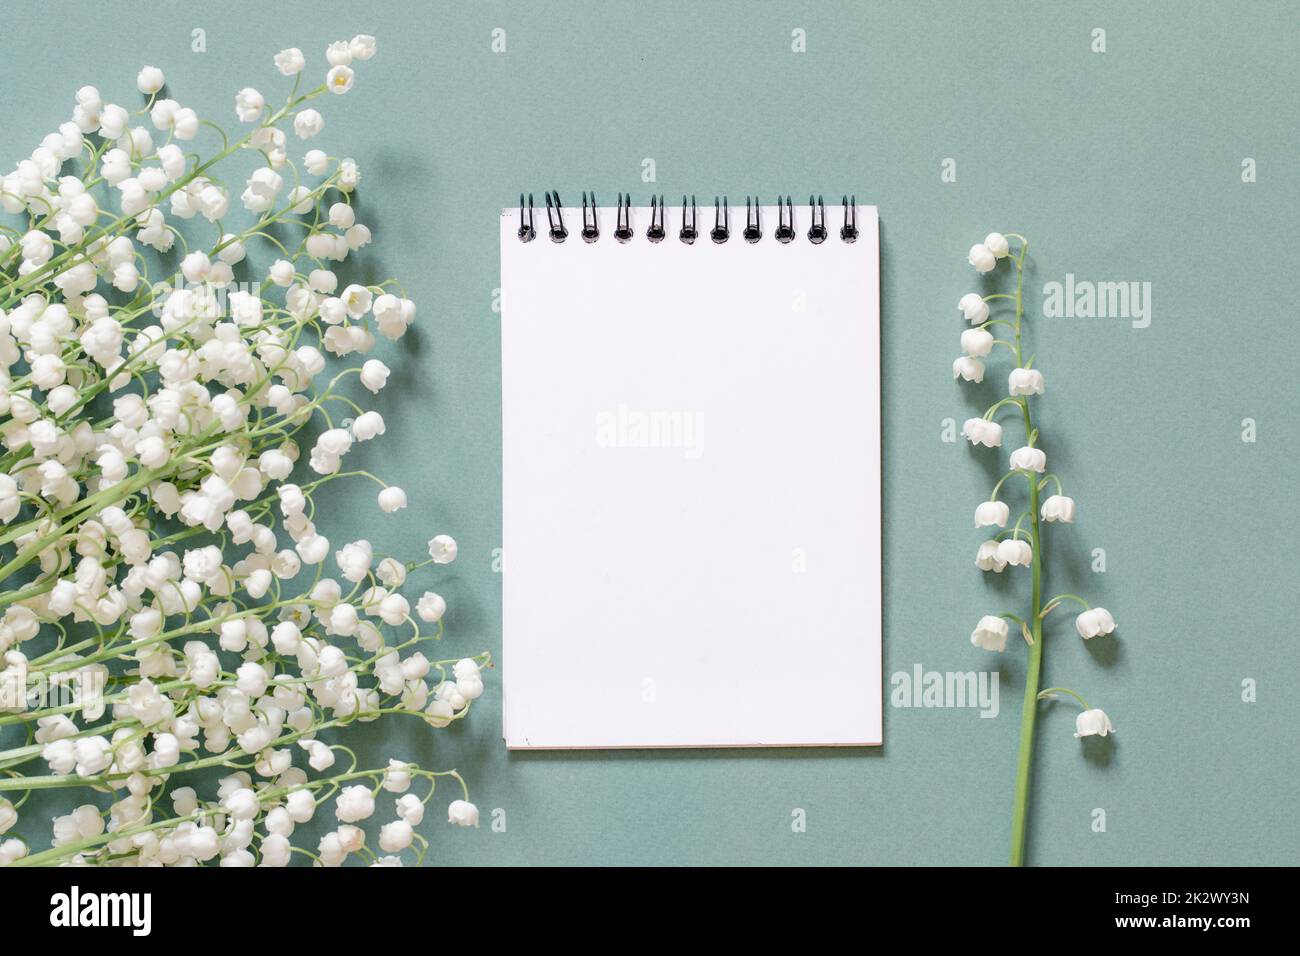 flowers and a blank sheet for writing what to do list or thanks. gratitude or planning concept Stock Photo